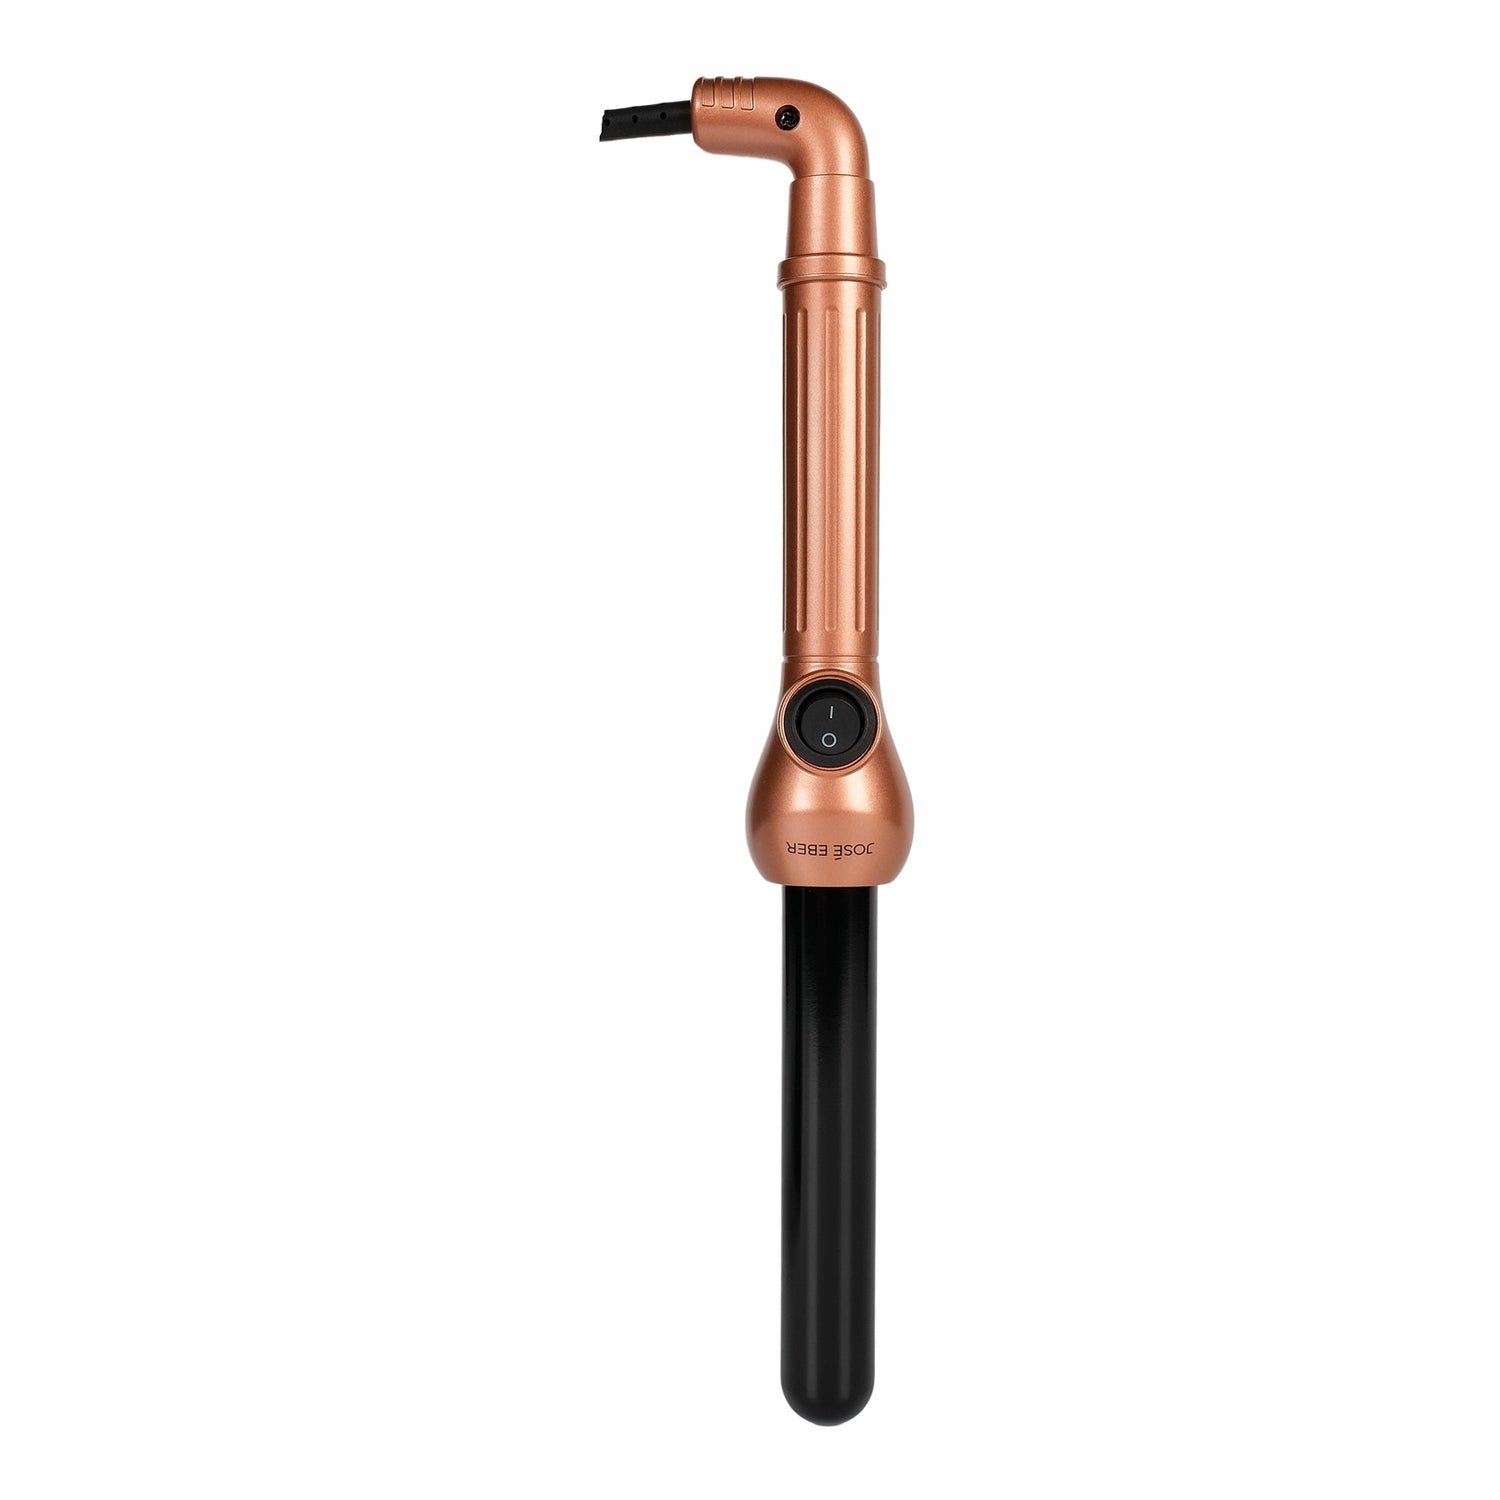 Jose Eber Pro Style 25mm Clipless Ceramic Curling Iron - Long Lasting and Shiny Curls - Rosegold - Couture Hair Pro